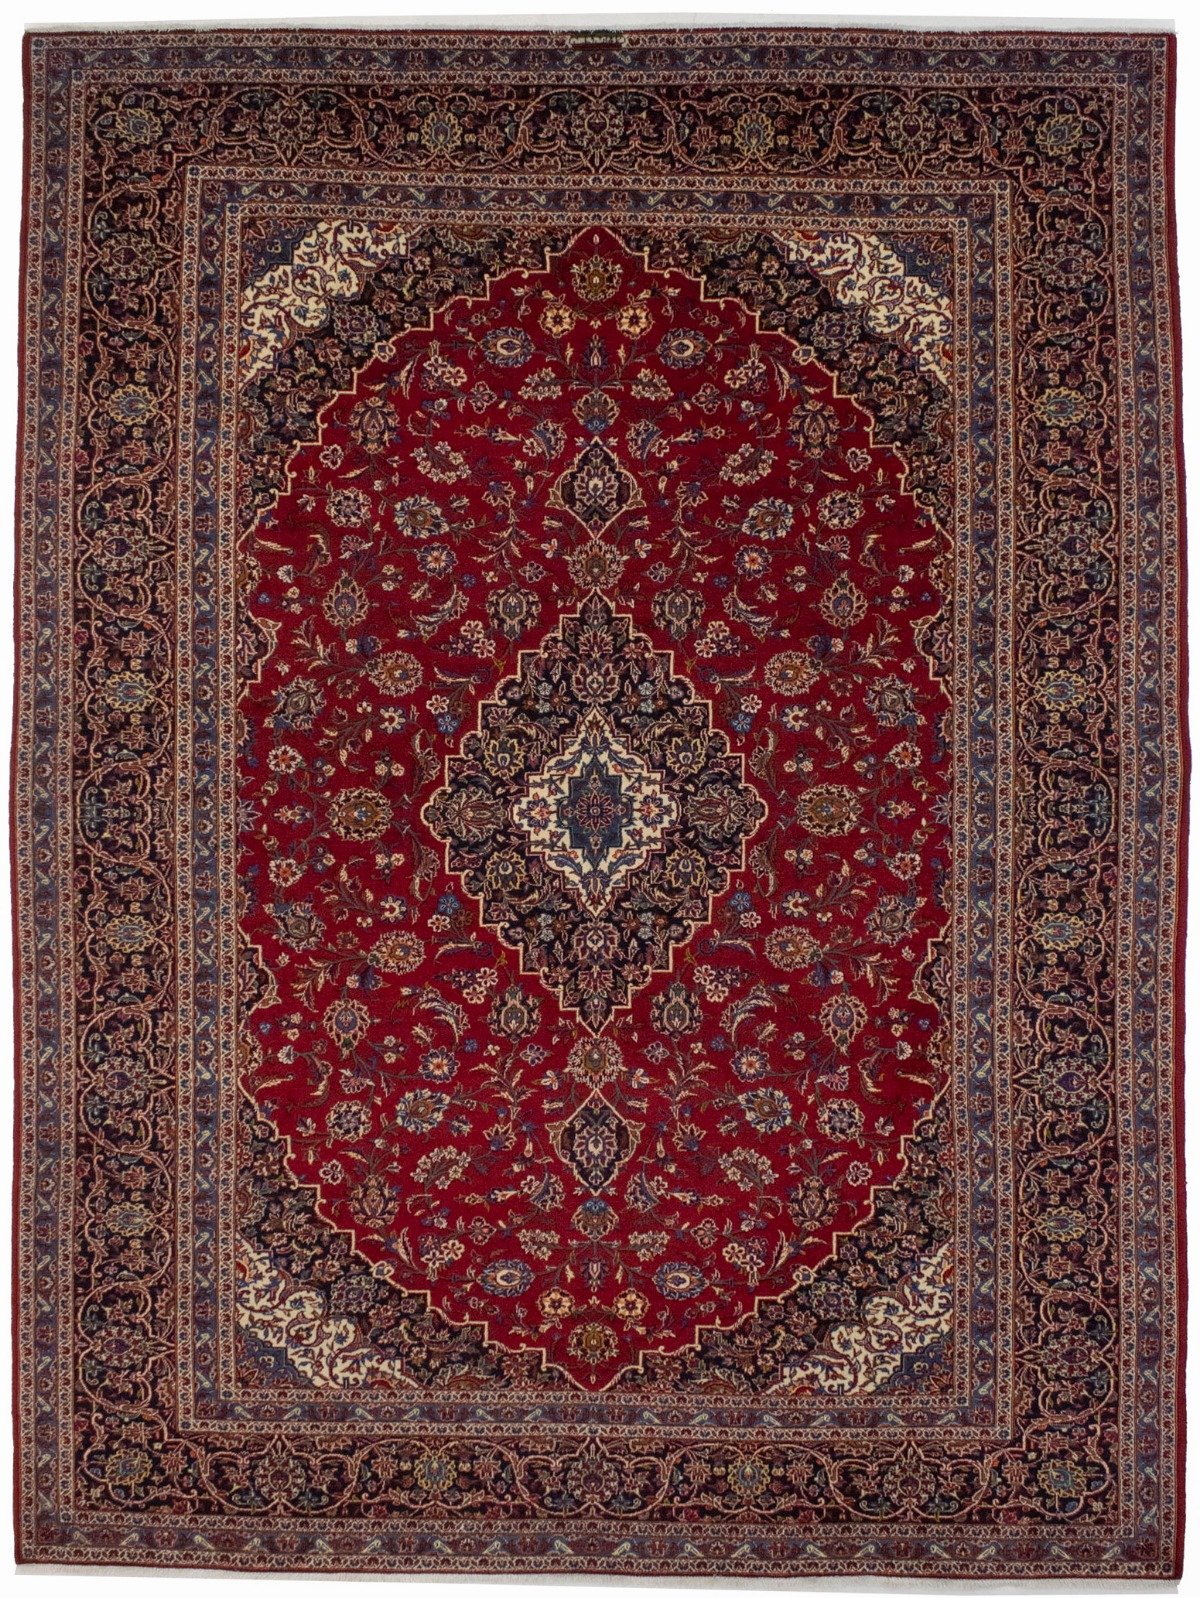 Semi Antique Traditional Red 10X13 Kashan Persian Rug